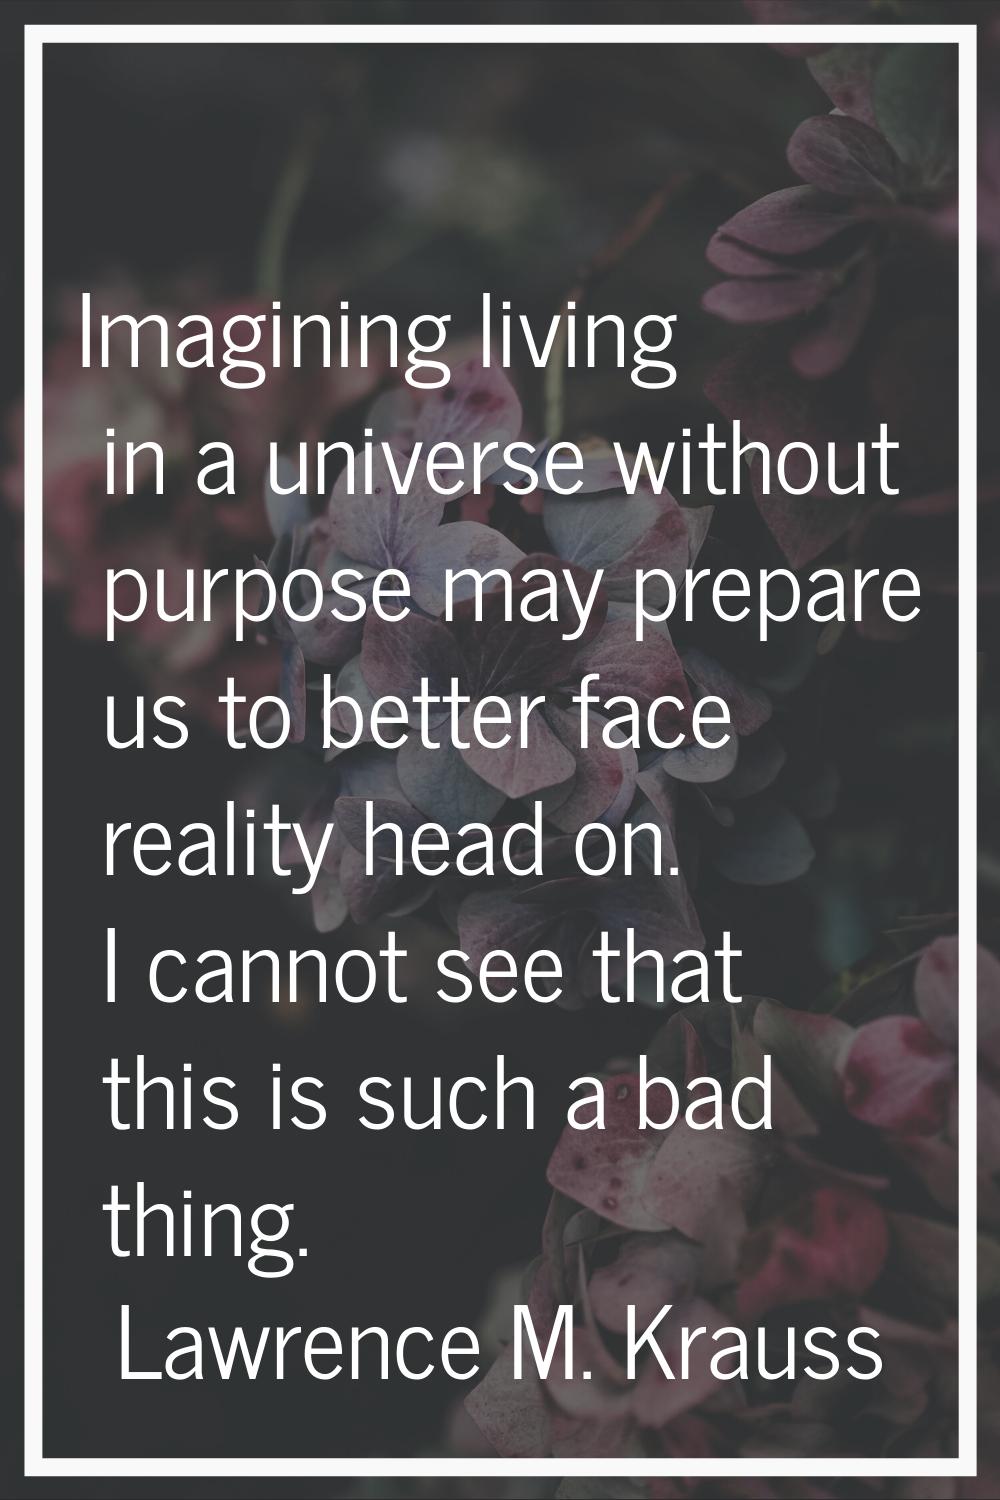 Imagining living in a universe without purpose may prepare us to better face reality head on. I can